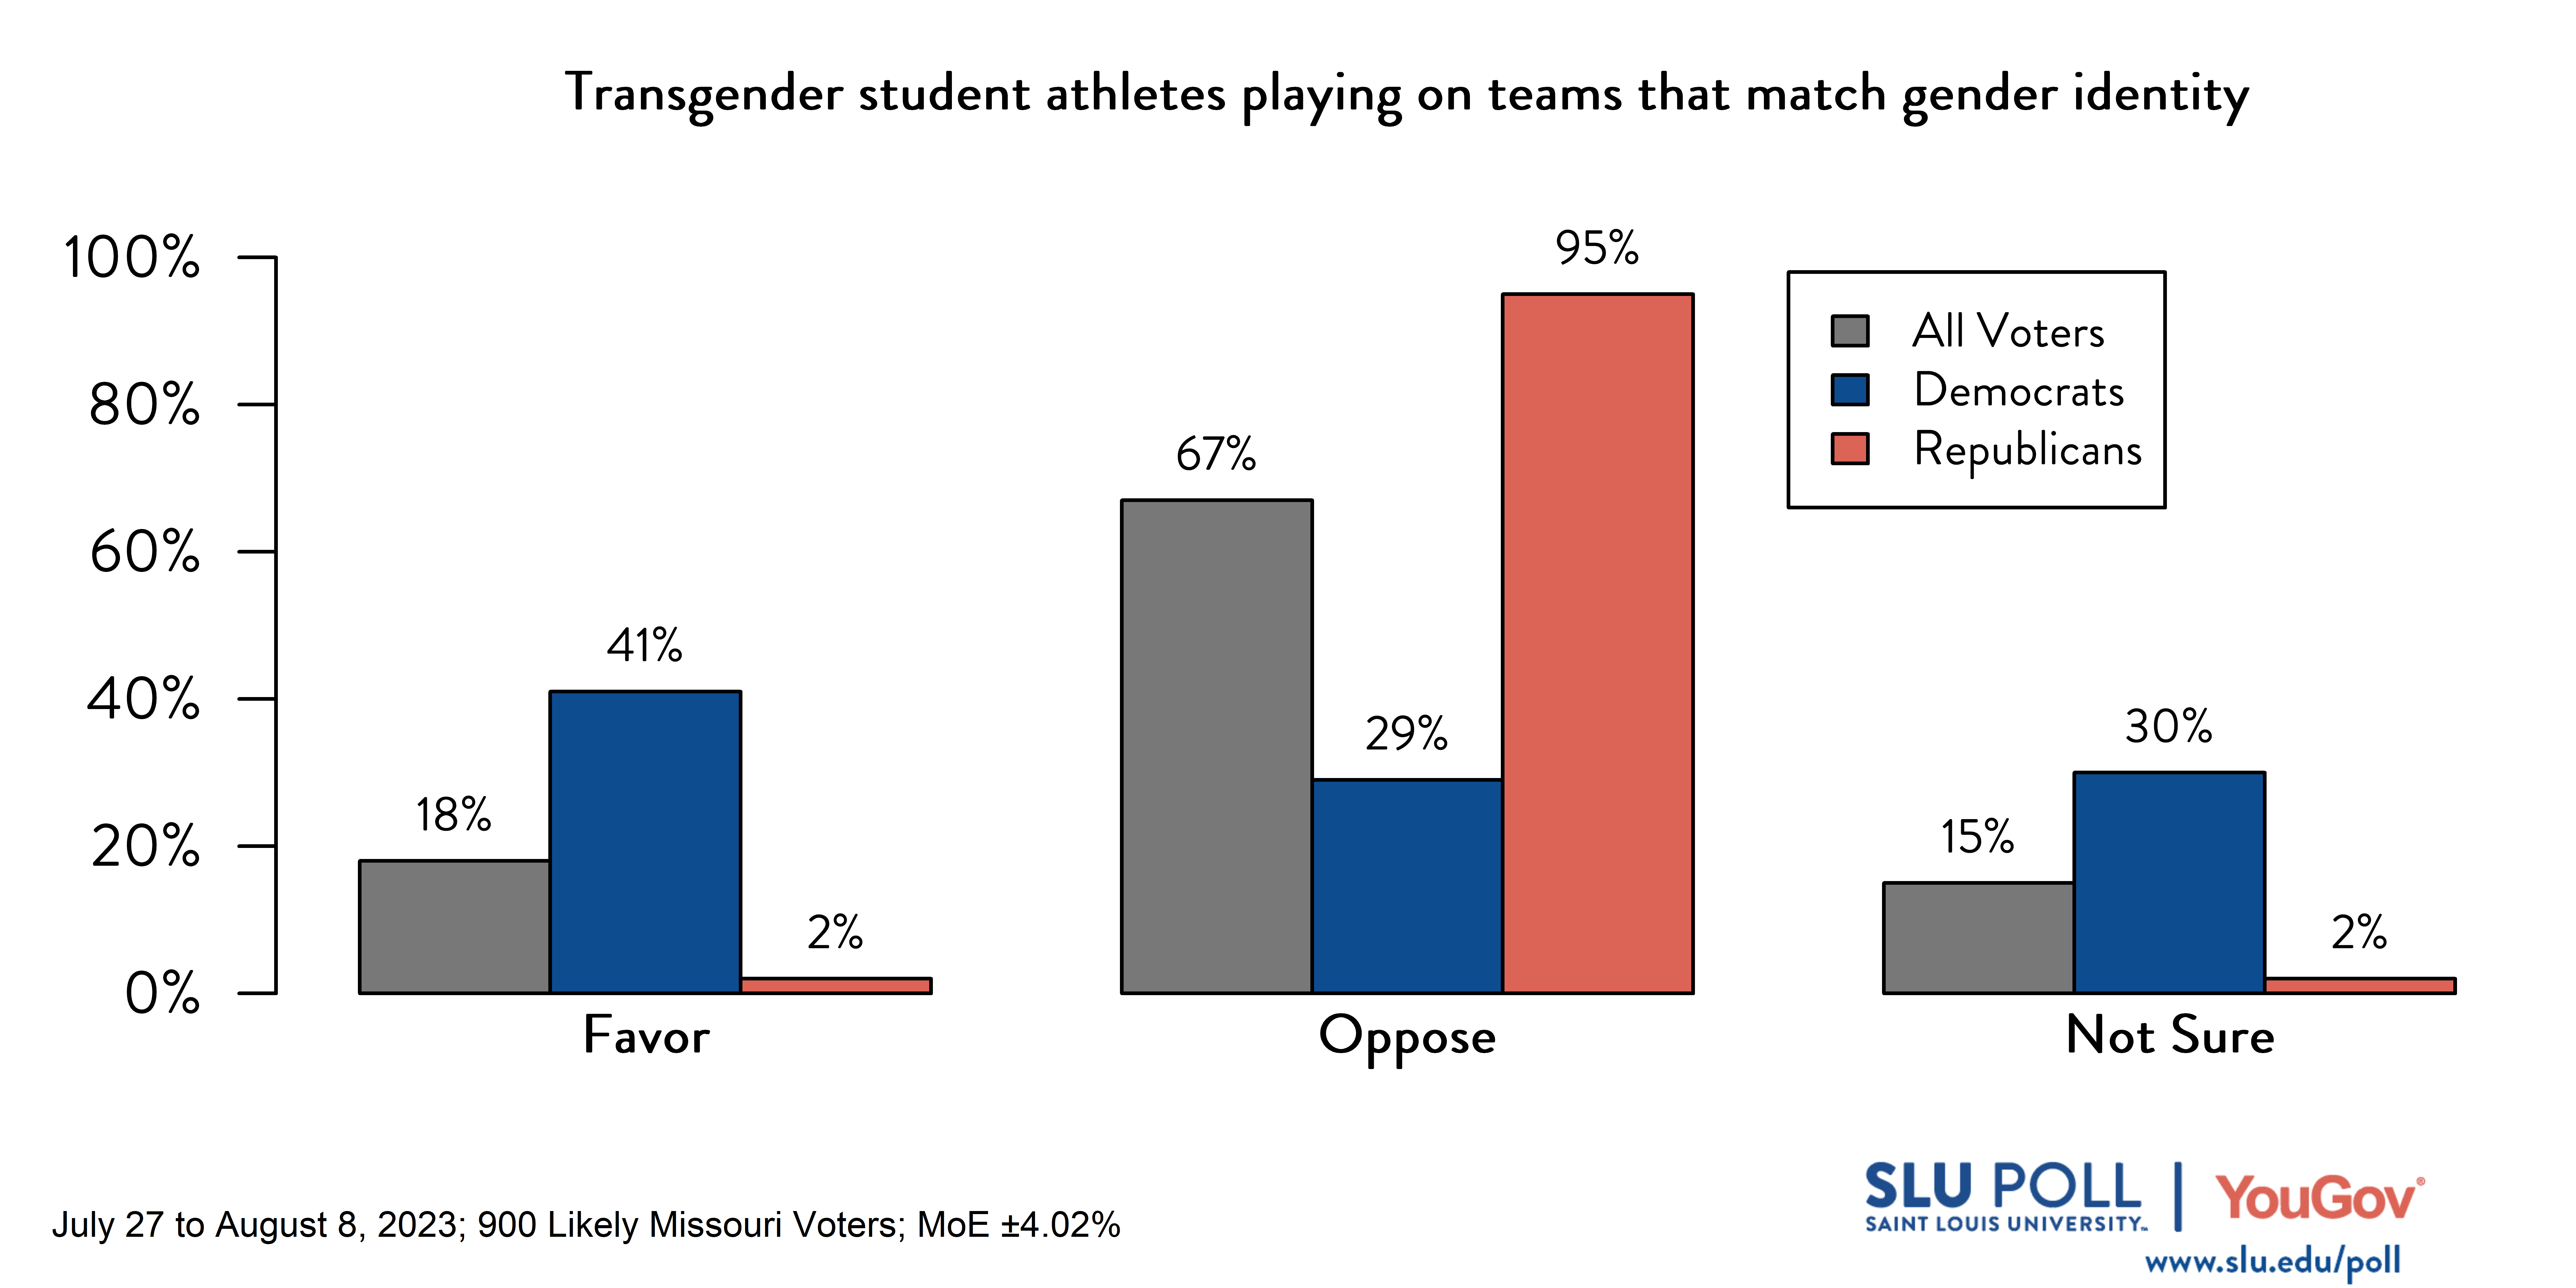 Likely voters' responses to 'Do you favor or oppose the following policies: Allowing transgender student athletes to play on sports teams that match their gender identity, rather than the gender they were assigned at birth.': 18% Favor, 67% Oppose, and 15% Not Sure. Democratic voters' responses: ' 41% Favor, 29% Oppose, and 30% Not Sure. Republican voters' responses: 2% Favor, 95% Oppose, and 2% Not Sure.